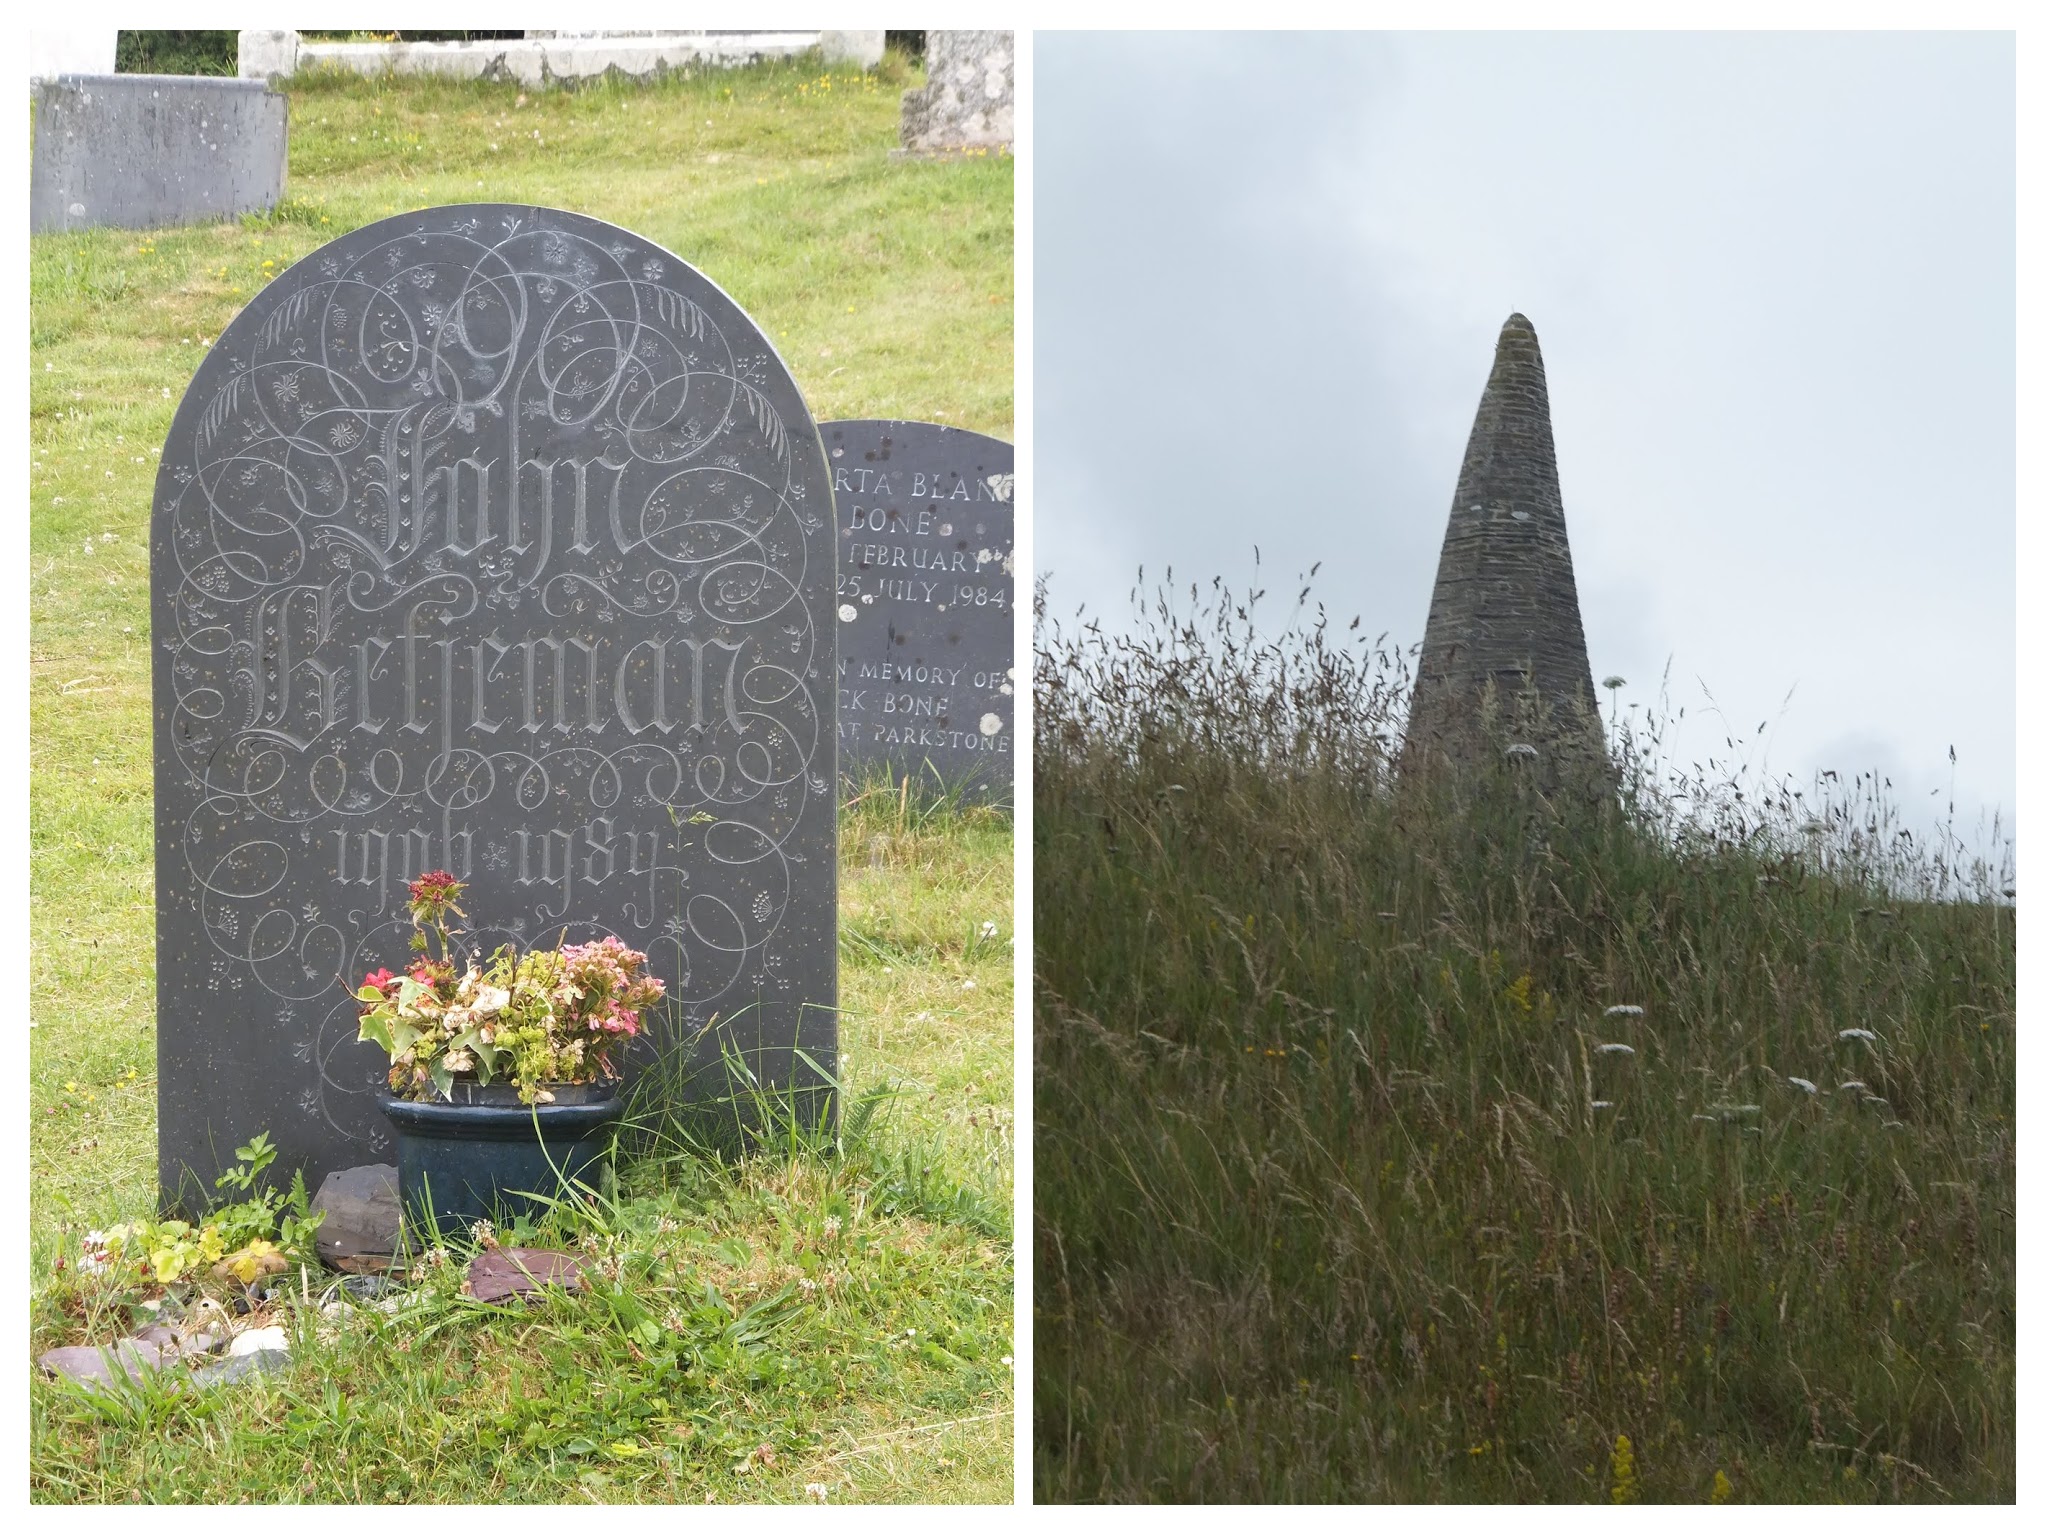 On the left is Sir John Betjemans gravestone and on the right, the church hidden in the sand dunes